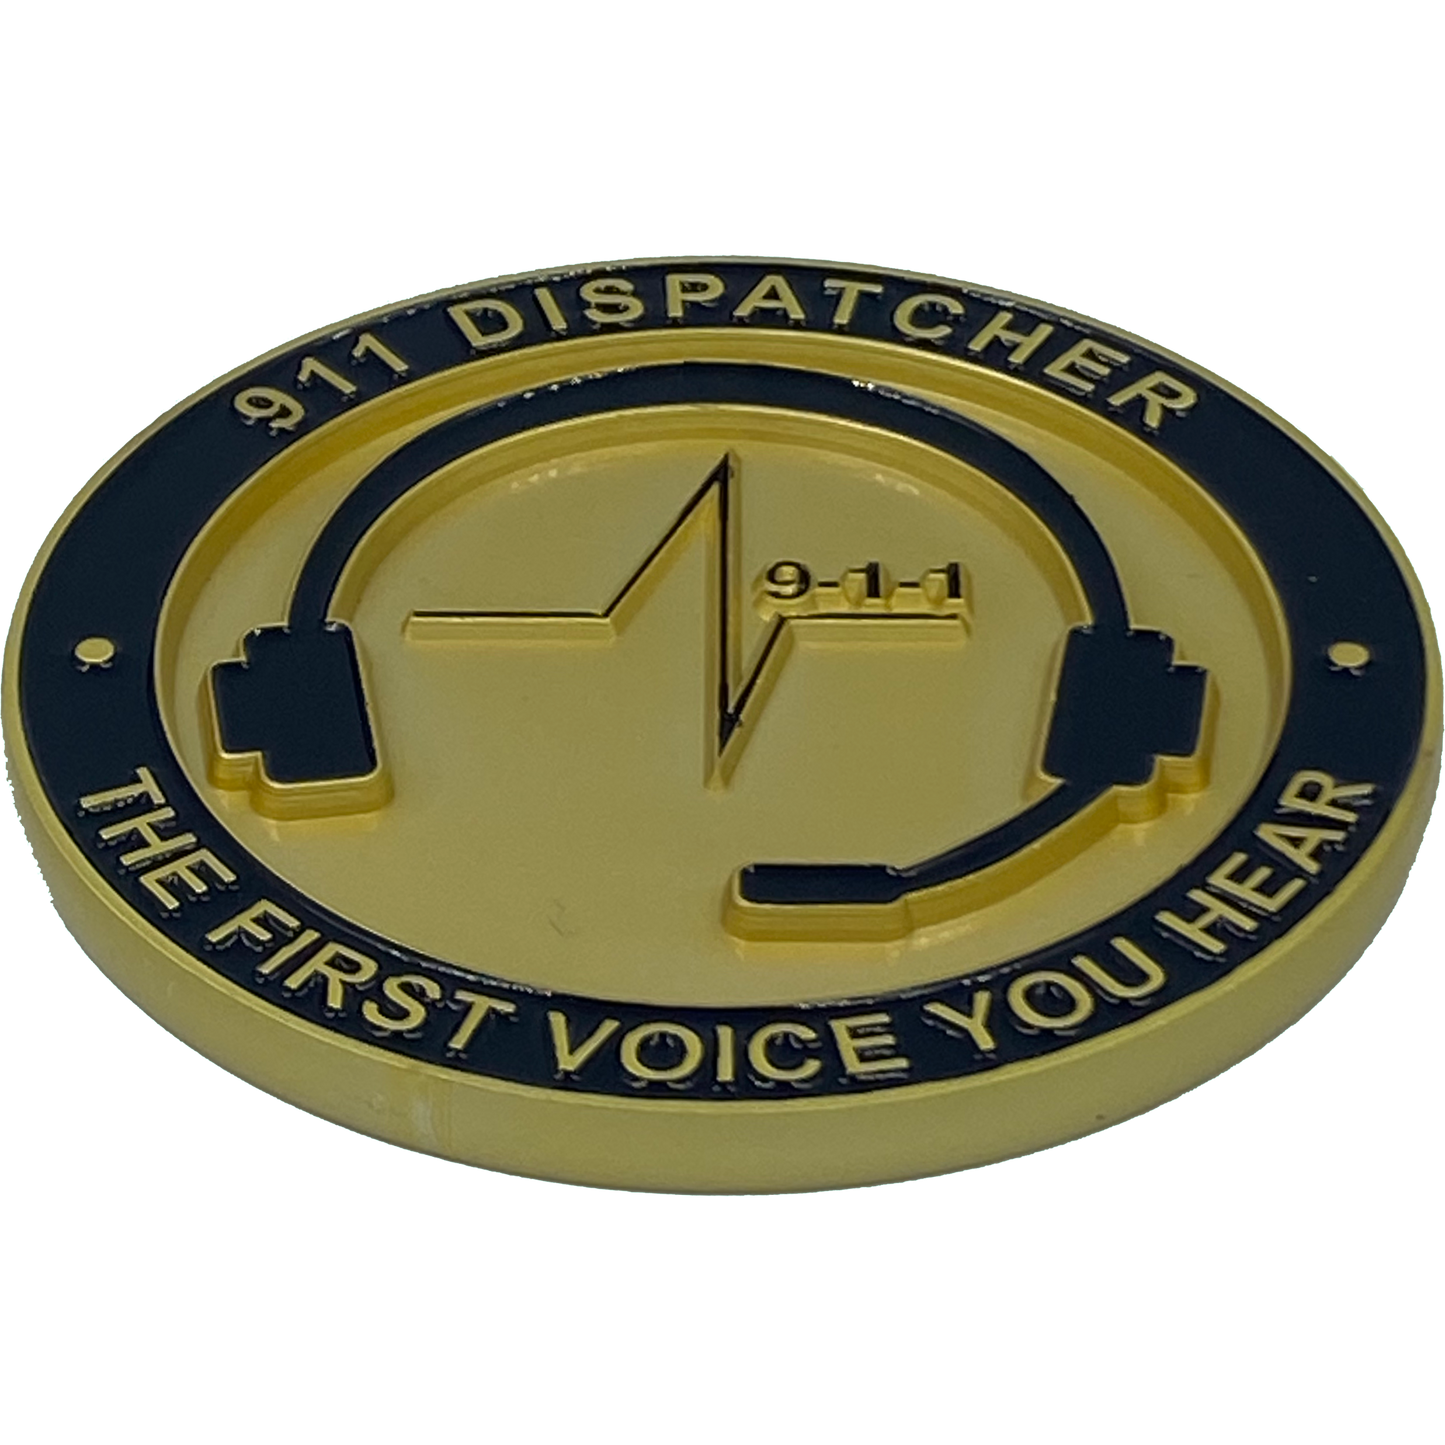 EL4-015 World's Biggest 911 Emergency Dispatcher Challenge Coin Thin Gold Line The First Voice Your Hear